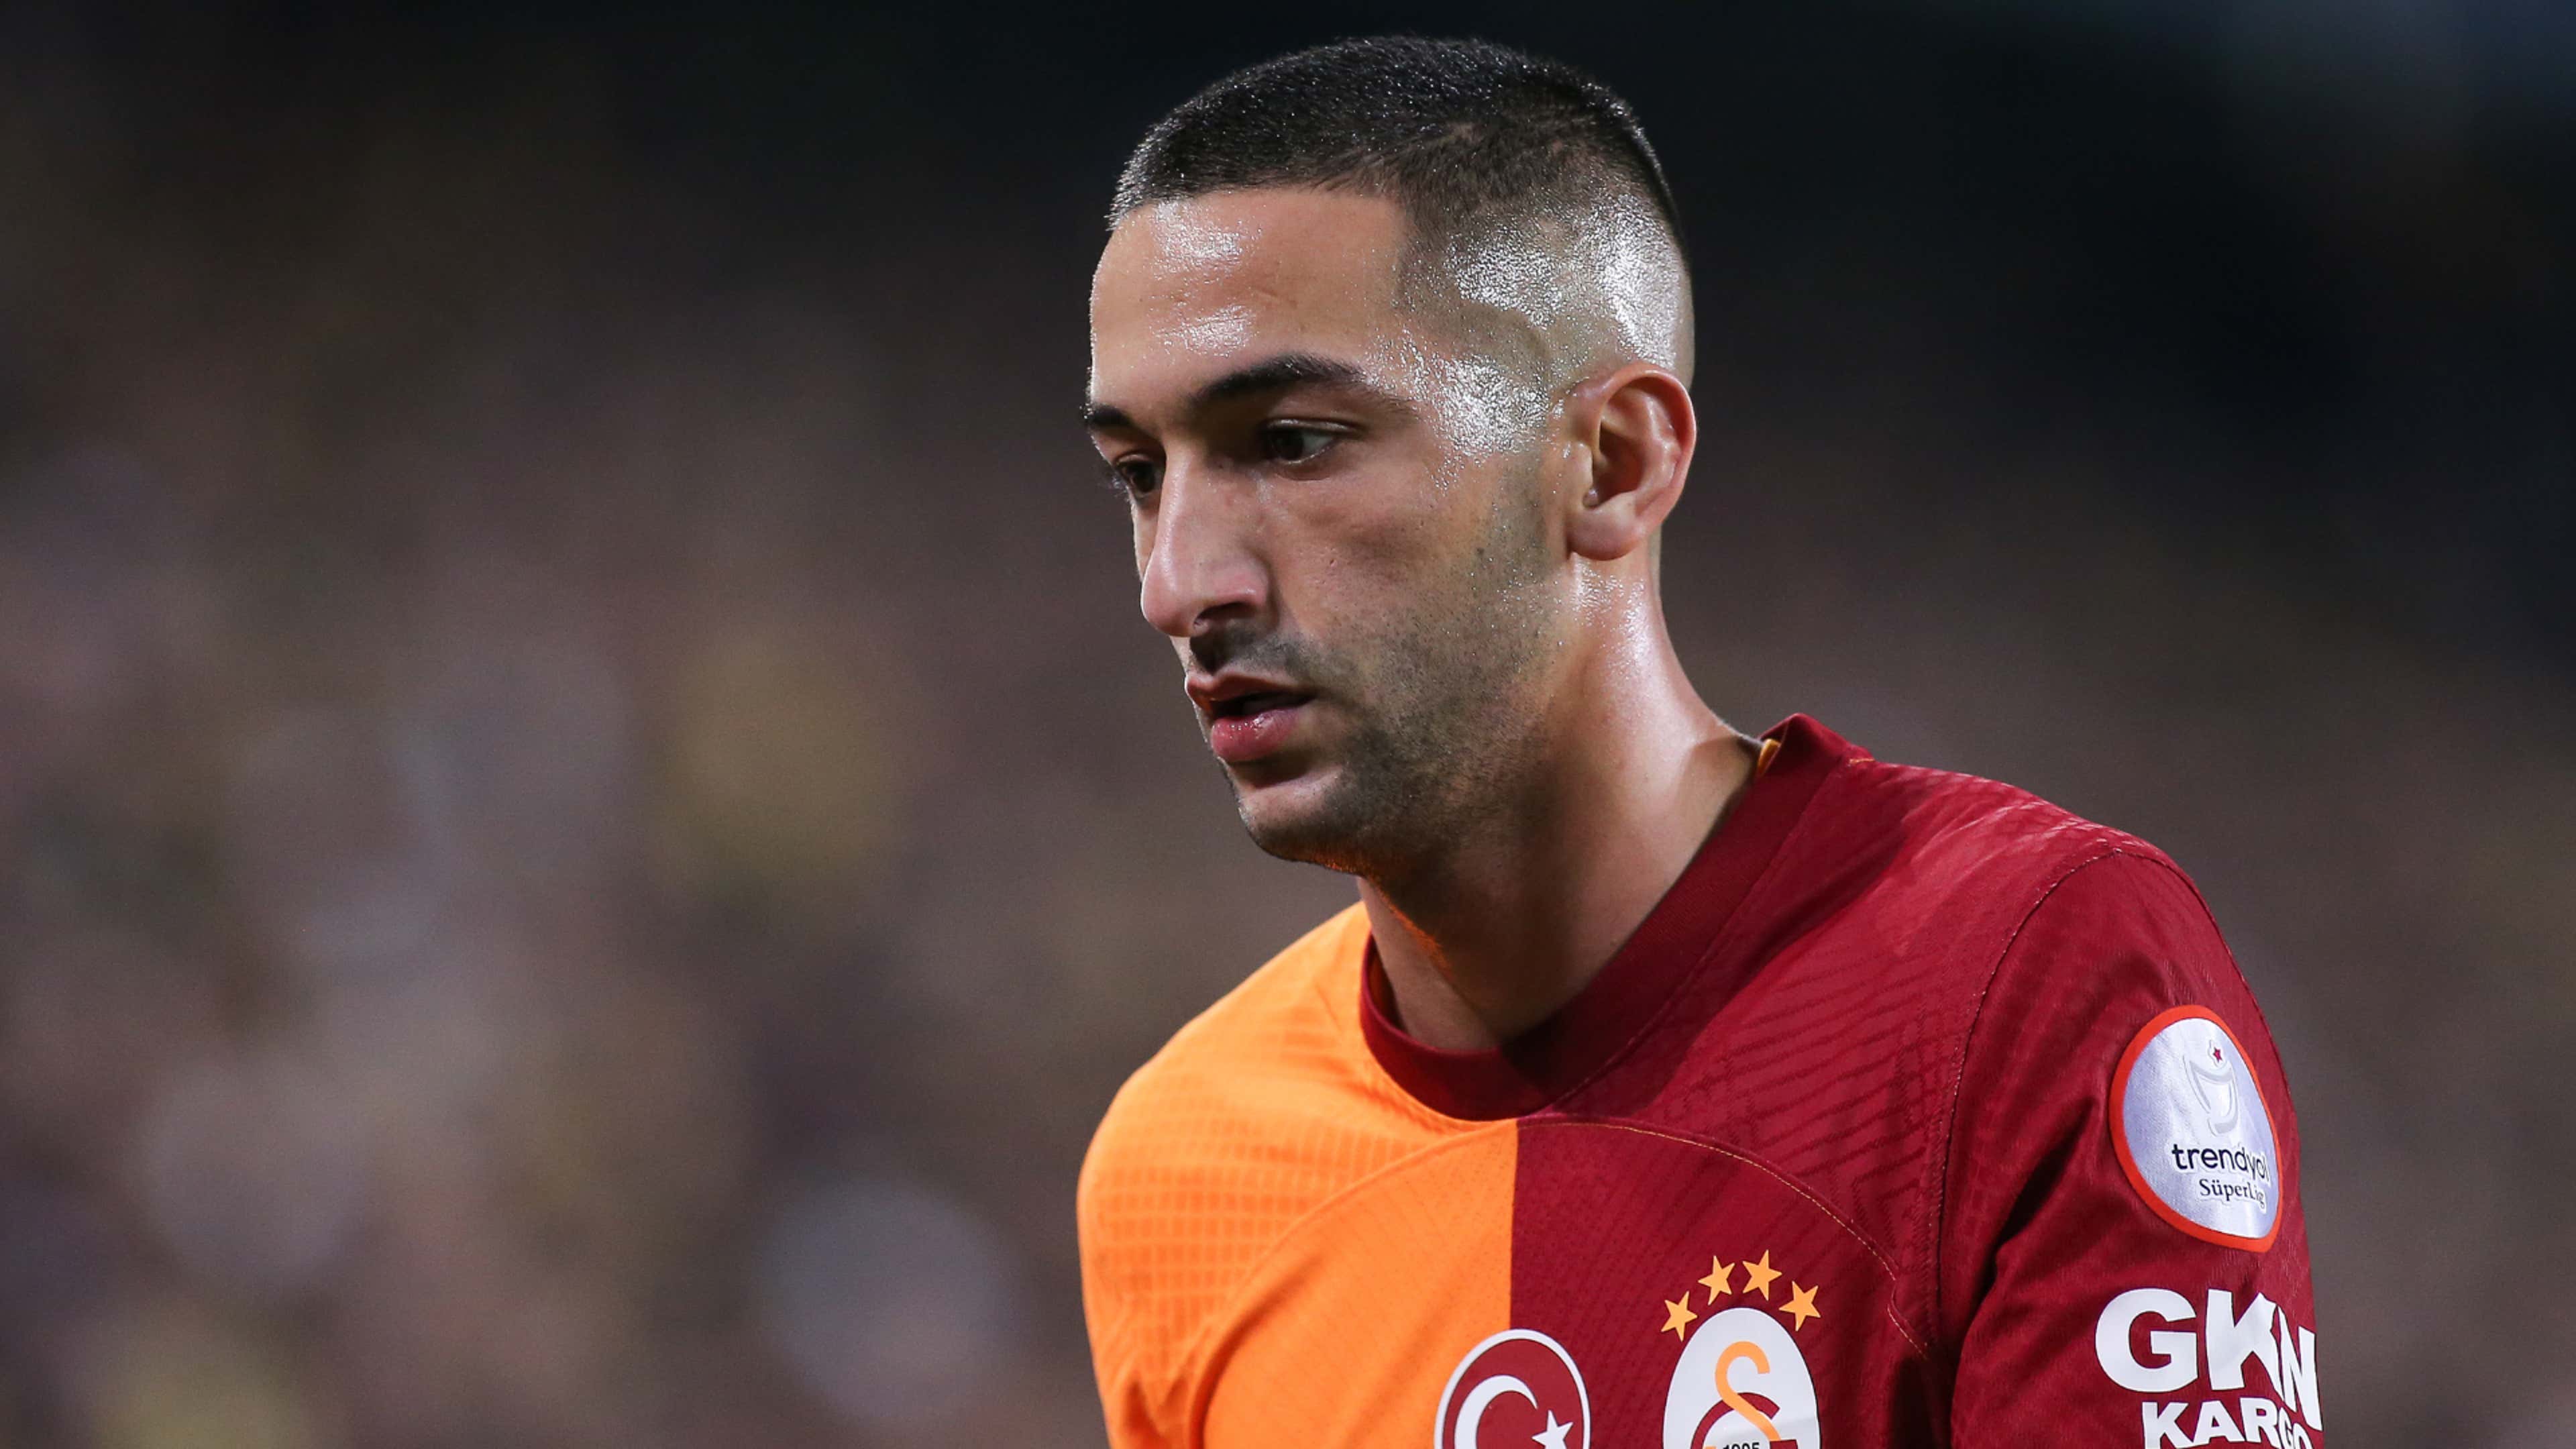 Hakim Ziyech's agent denies making Galatasaray exit statement amid reports  forgotten Chelsea man will see loan deal cut short this month